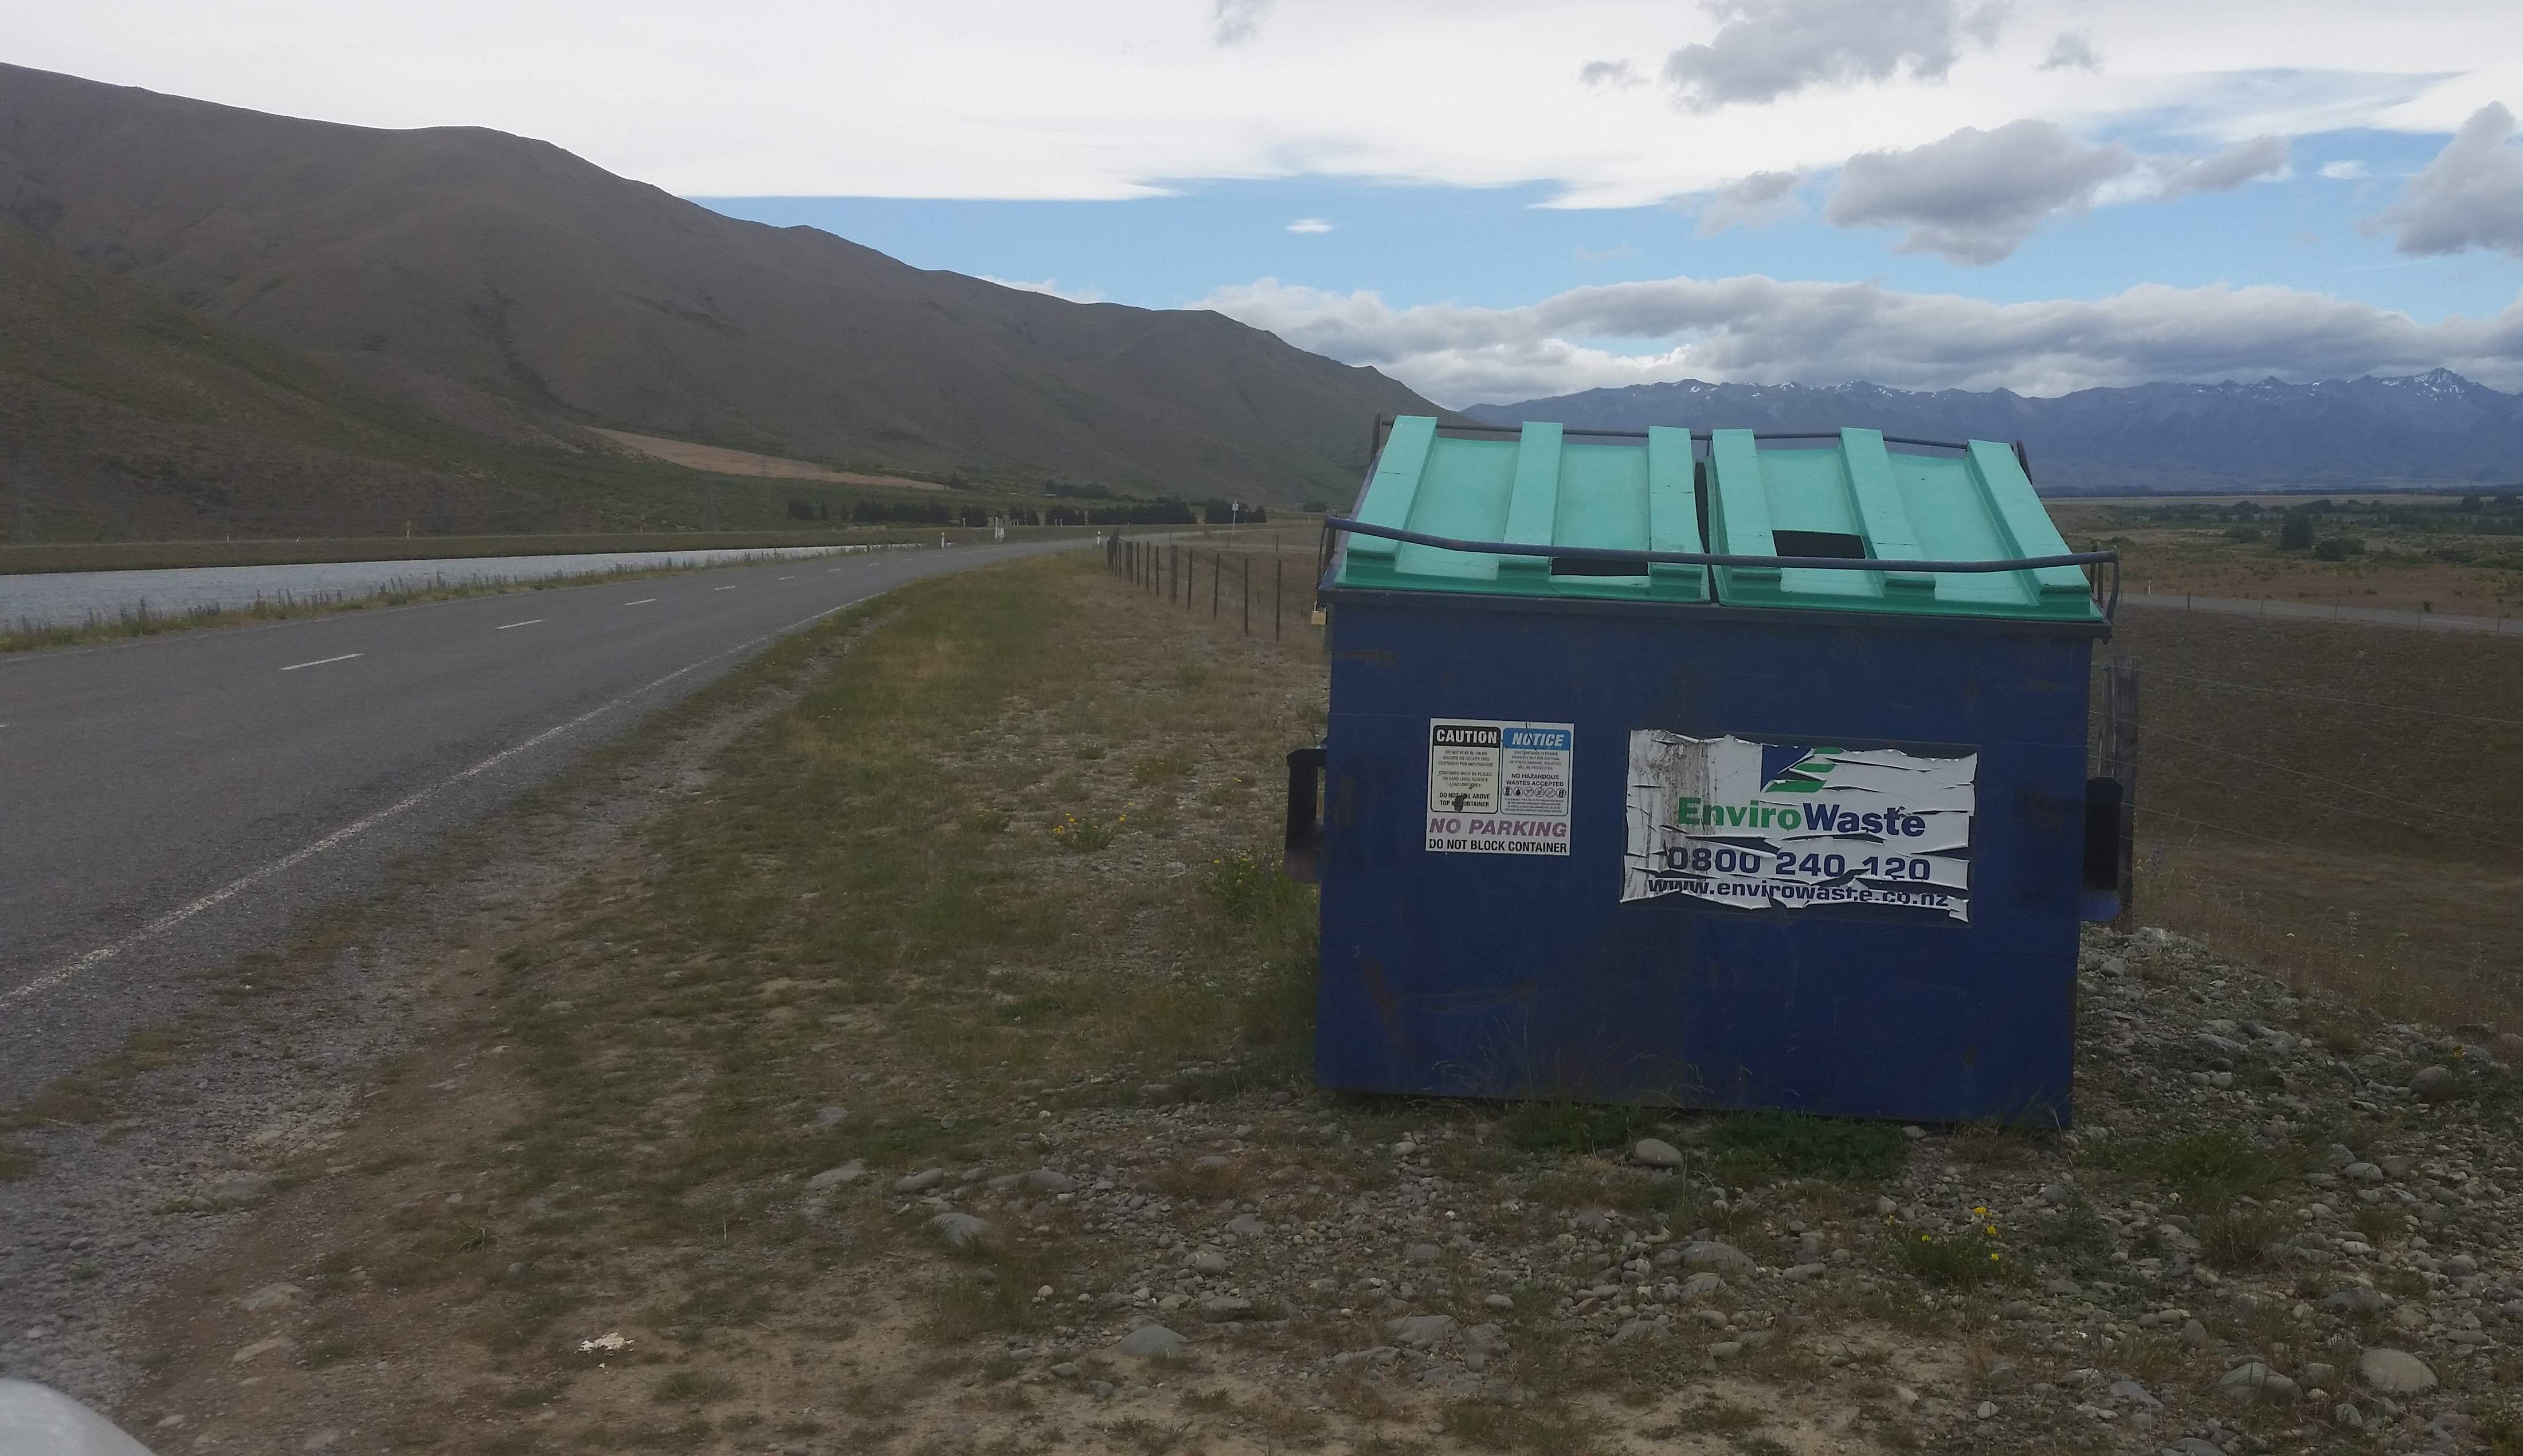 WFR1718.26 Please use these general waste rubbish bins located near the Ohau power station intakes